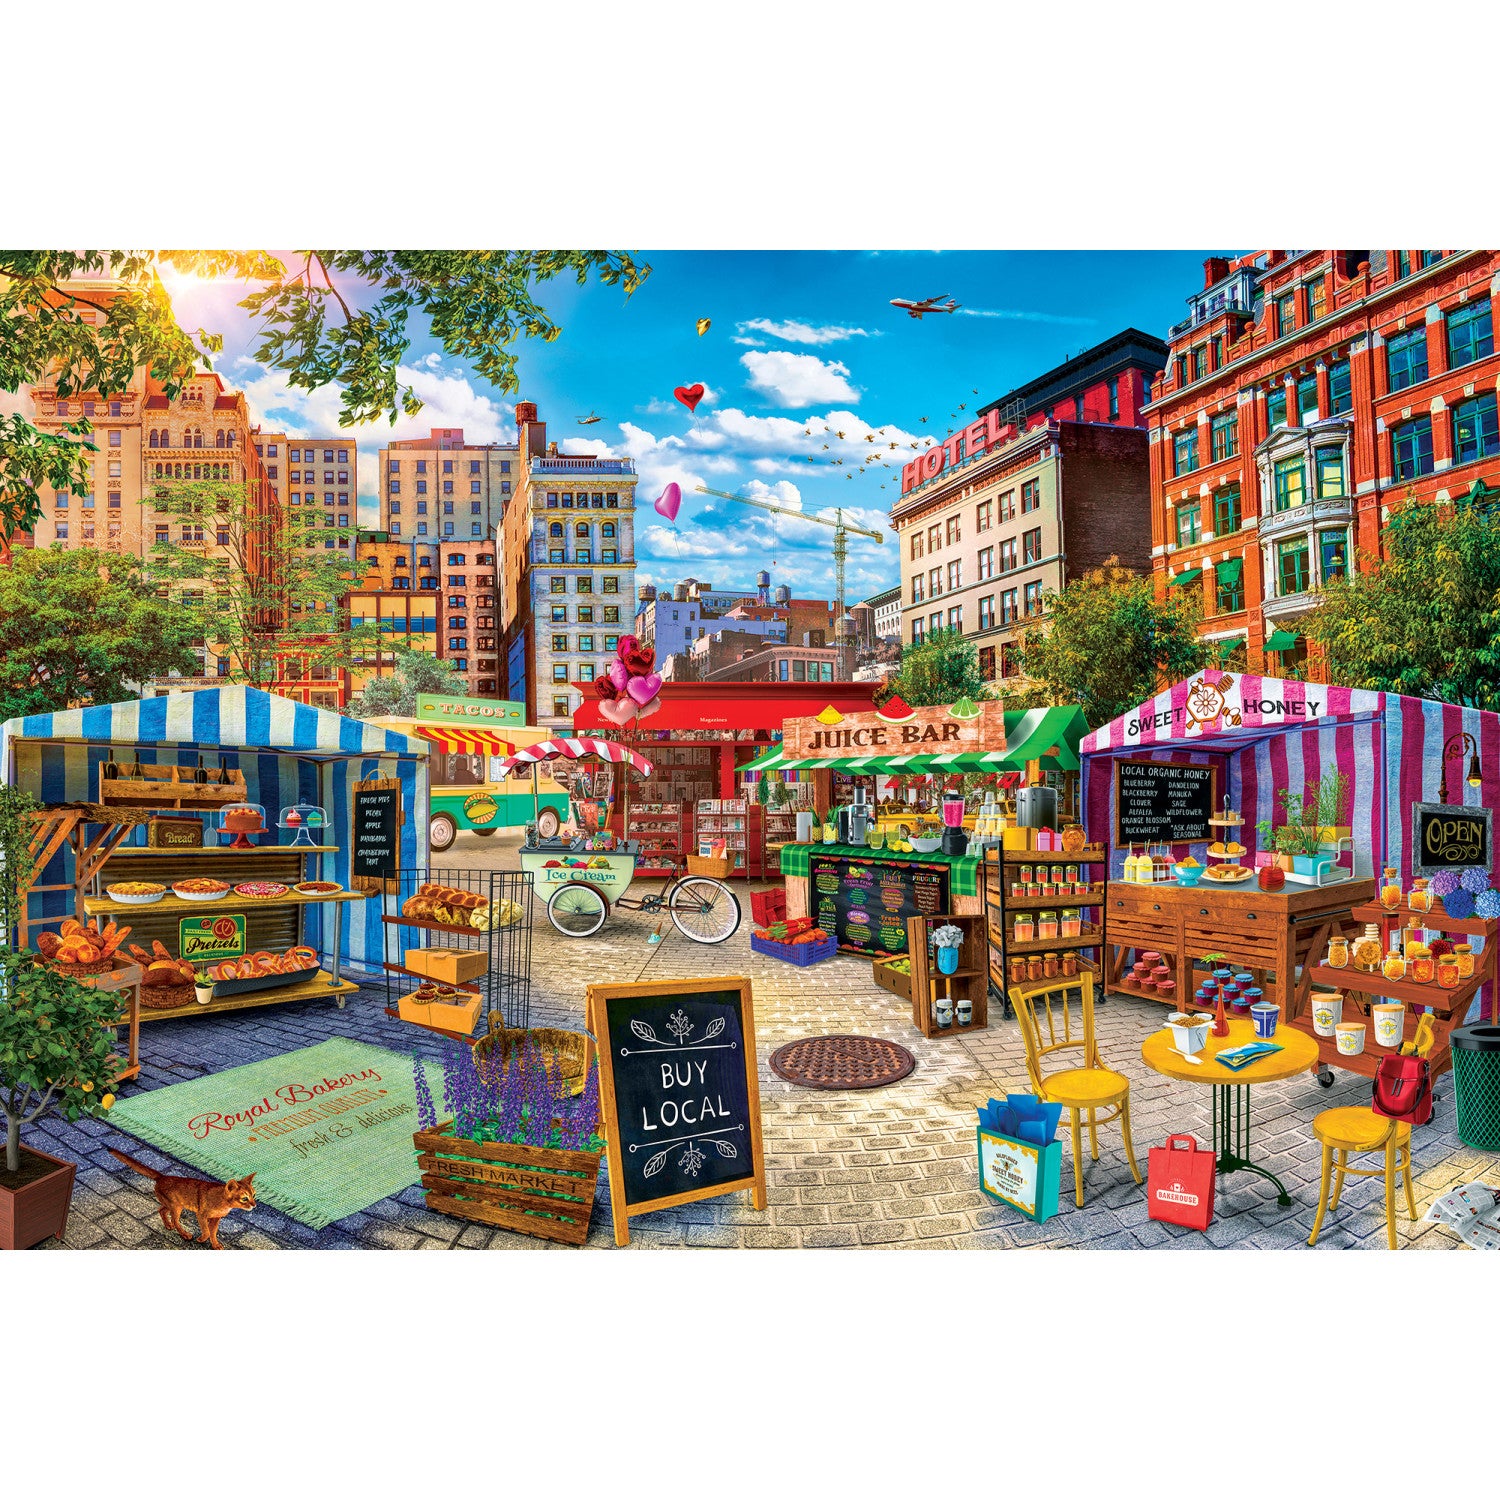 Signature - Buy Local Honey 5000 Piece Puzzle – Flawed